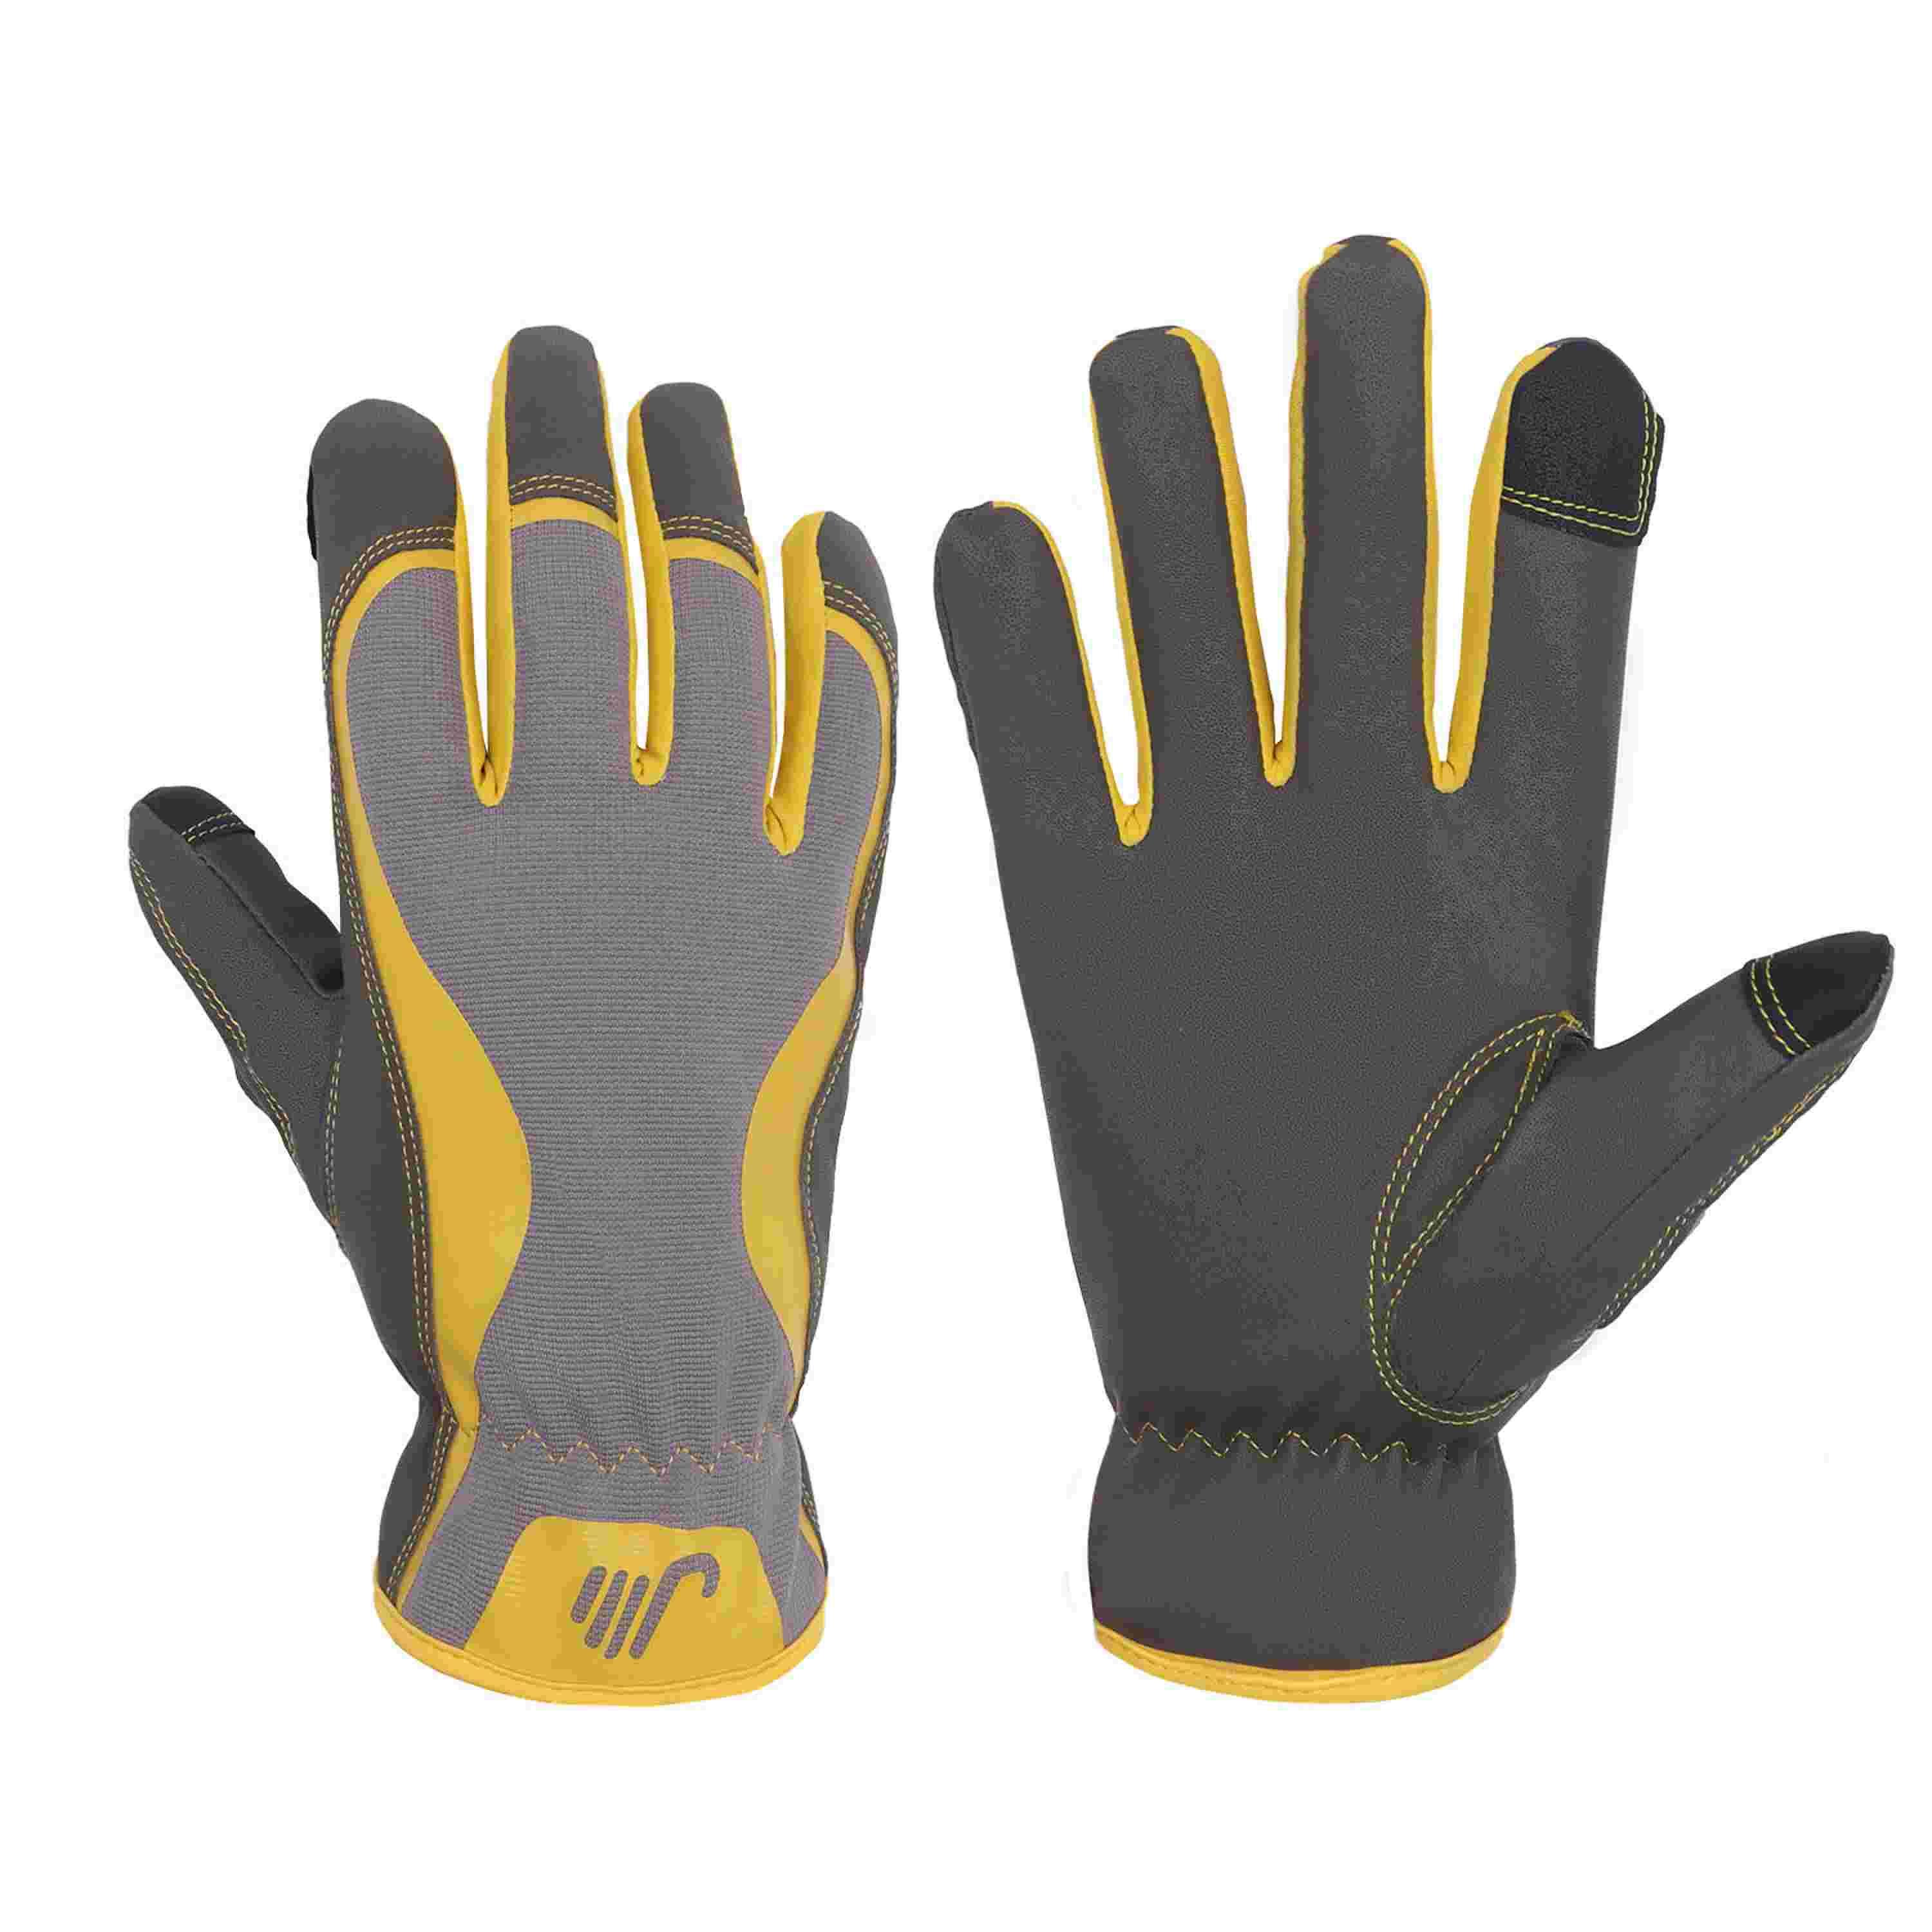 6172 PRISAFETY best practical abrasion resistance cutting resistance mechanic gloves working gloves safety work